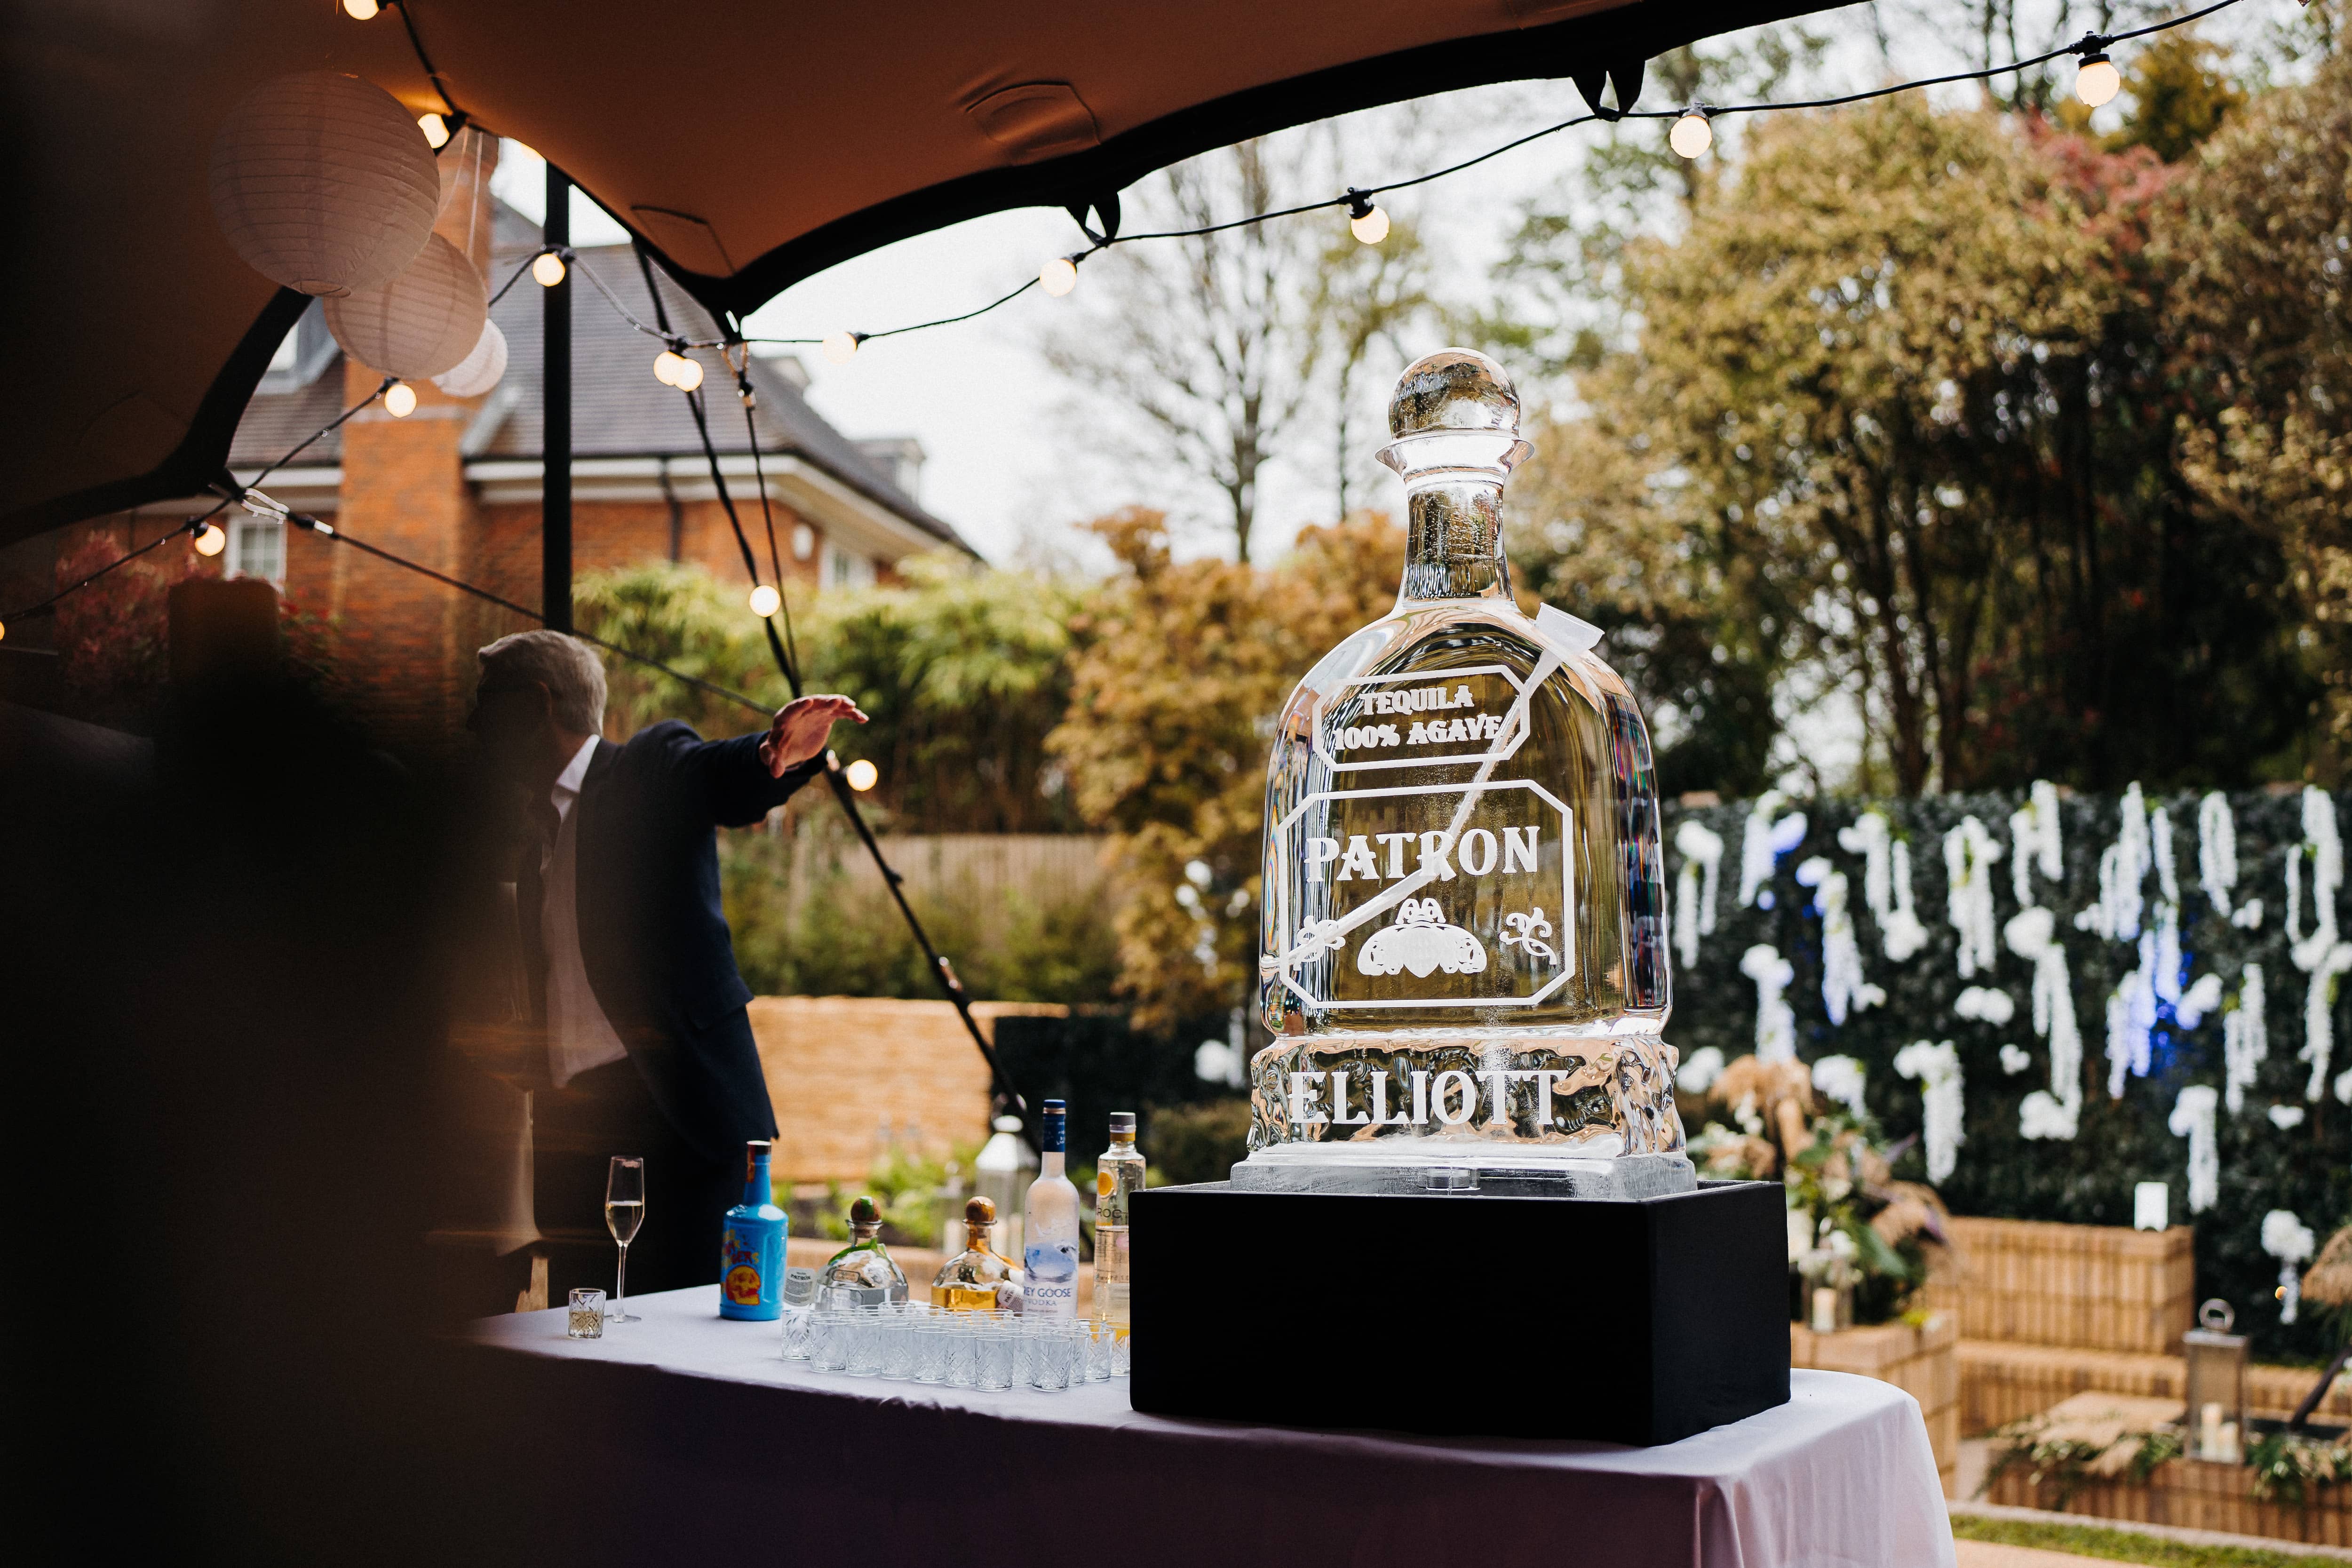 Ice sculpture of a Tequilla bottle